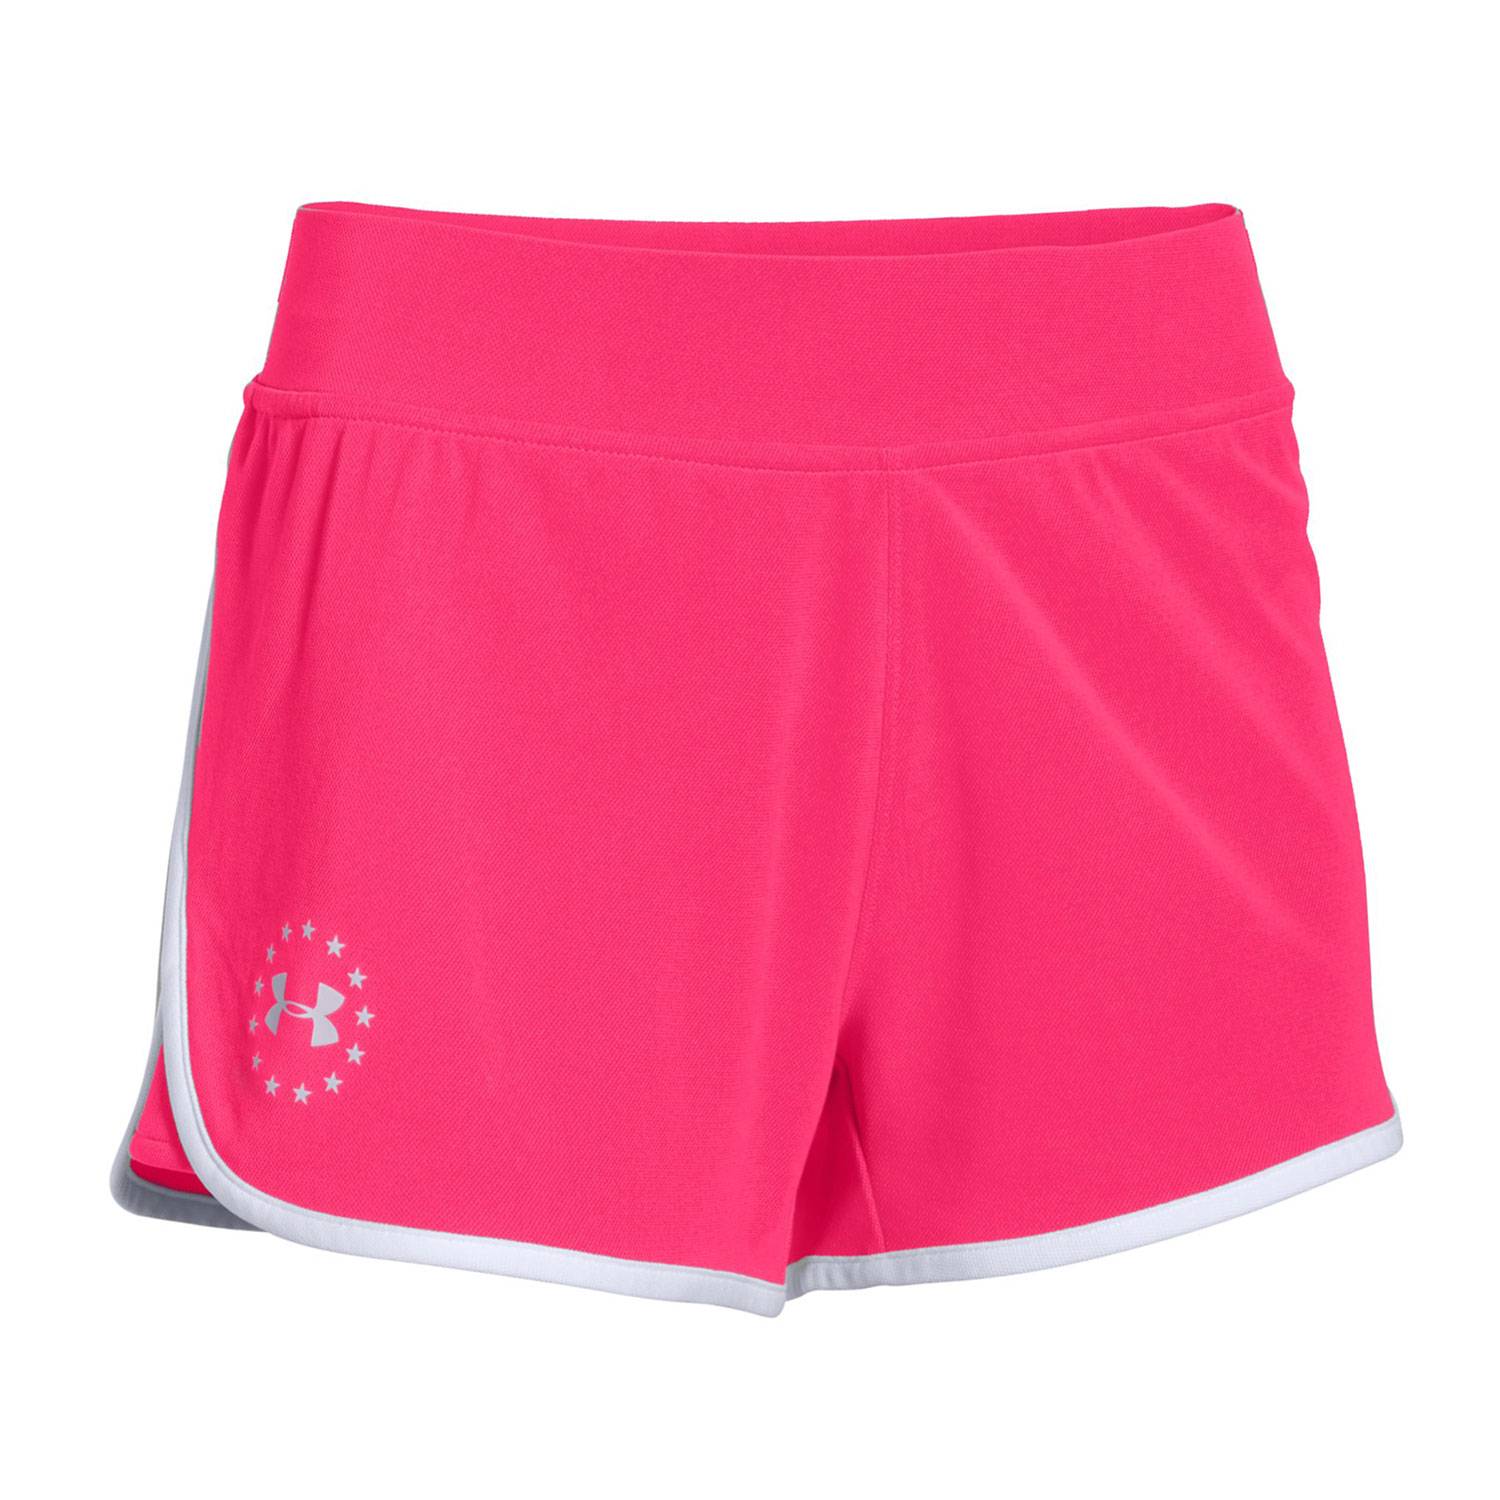 UNDER ARMOUR WOMEN'S FREEDOM SHORTS